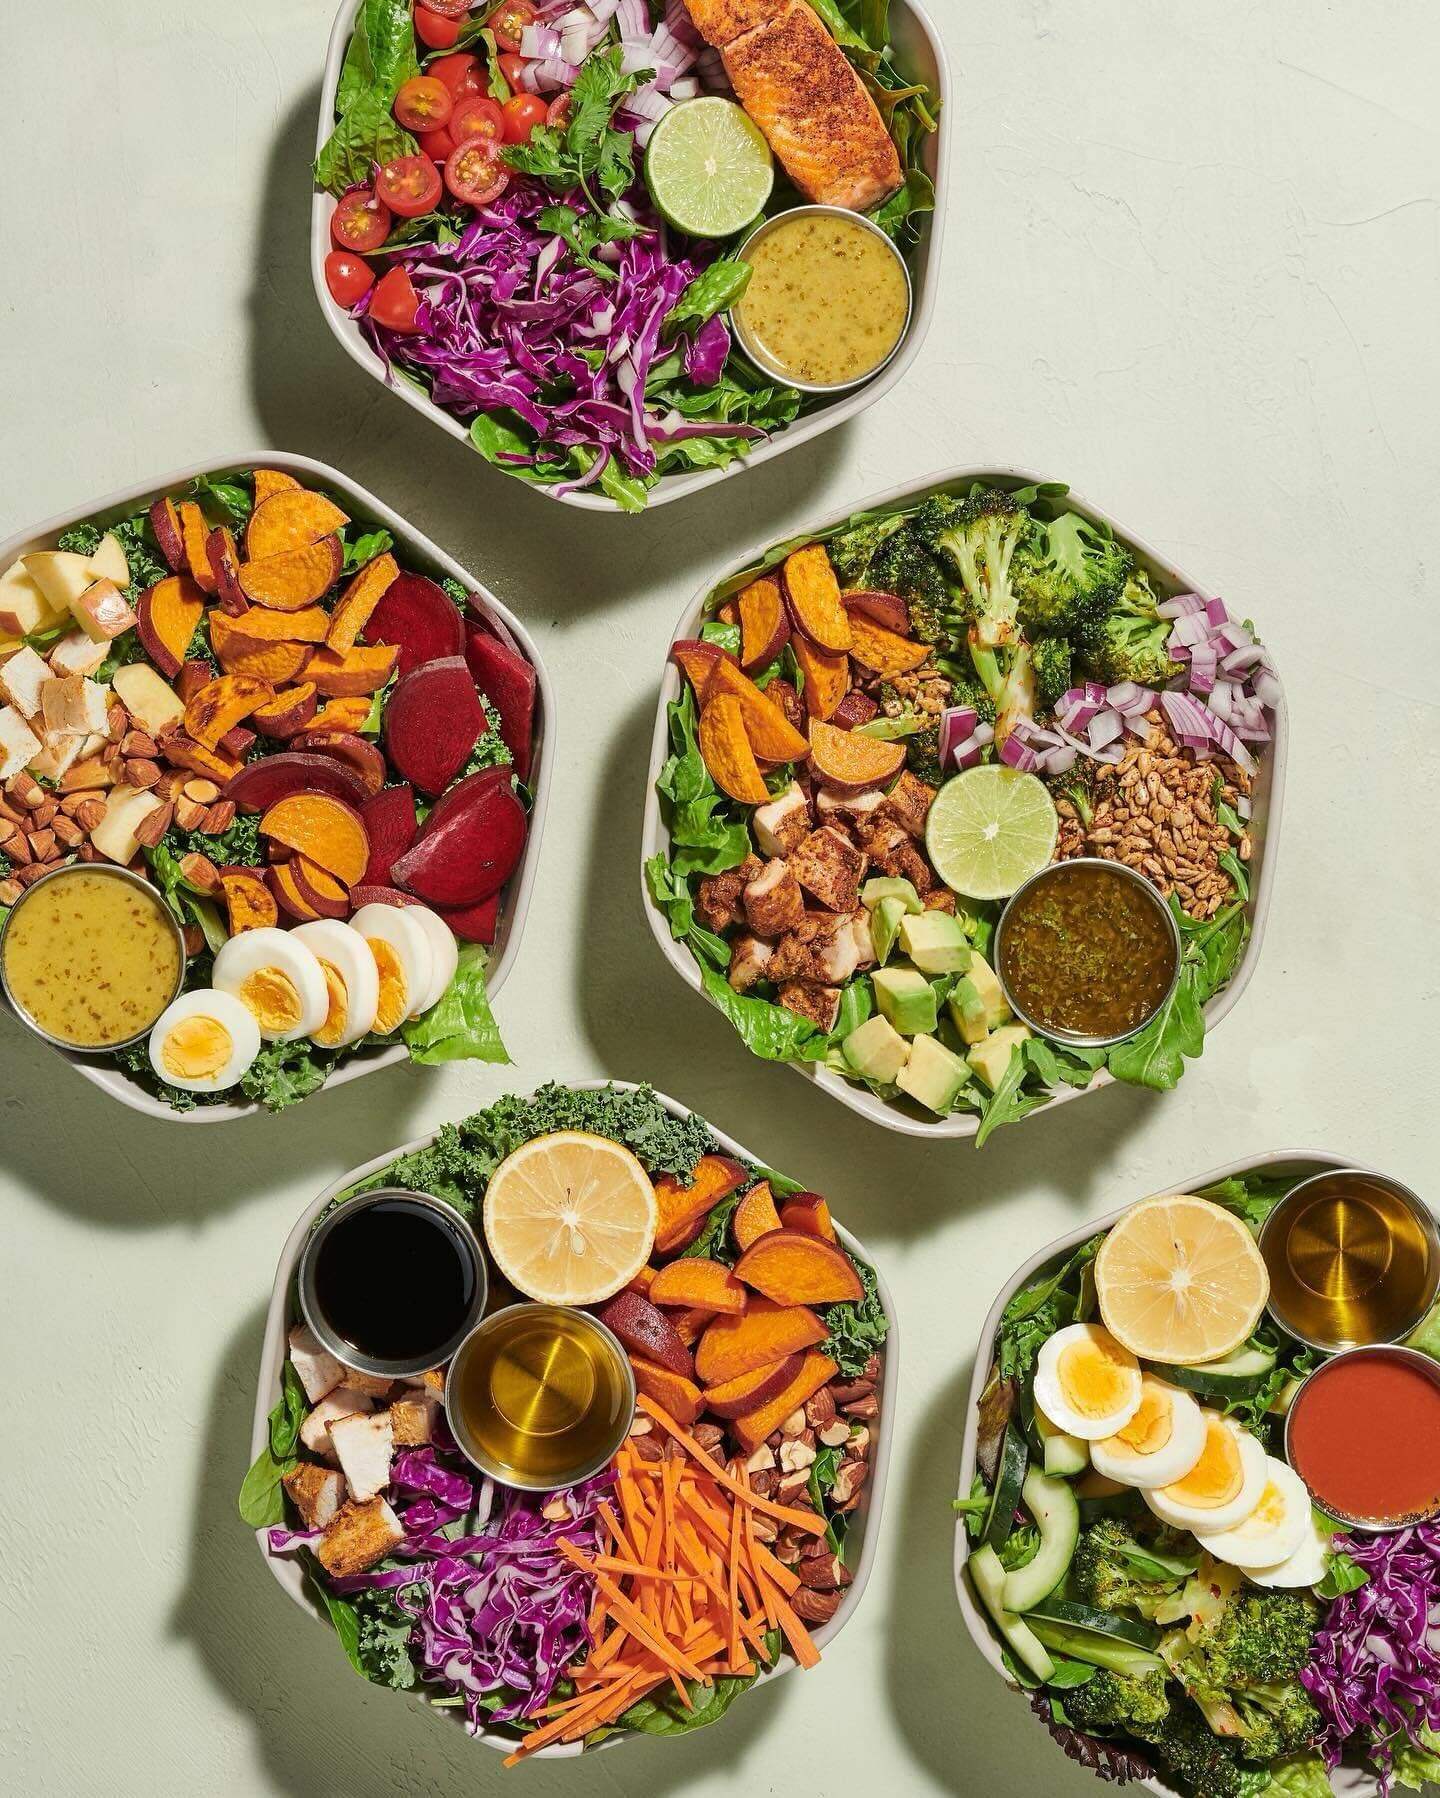 COMING SOON! @sweetgreen will be opening in the Commons at #NorthHills later this year! 🤤